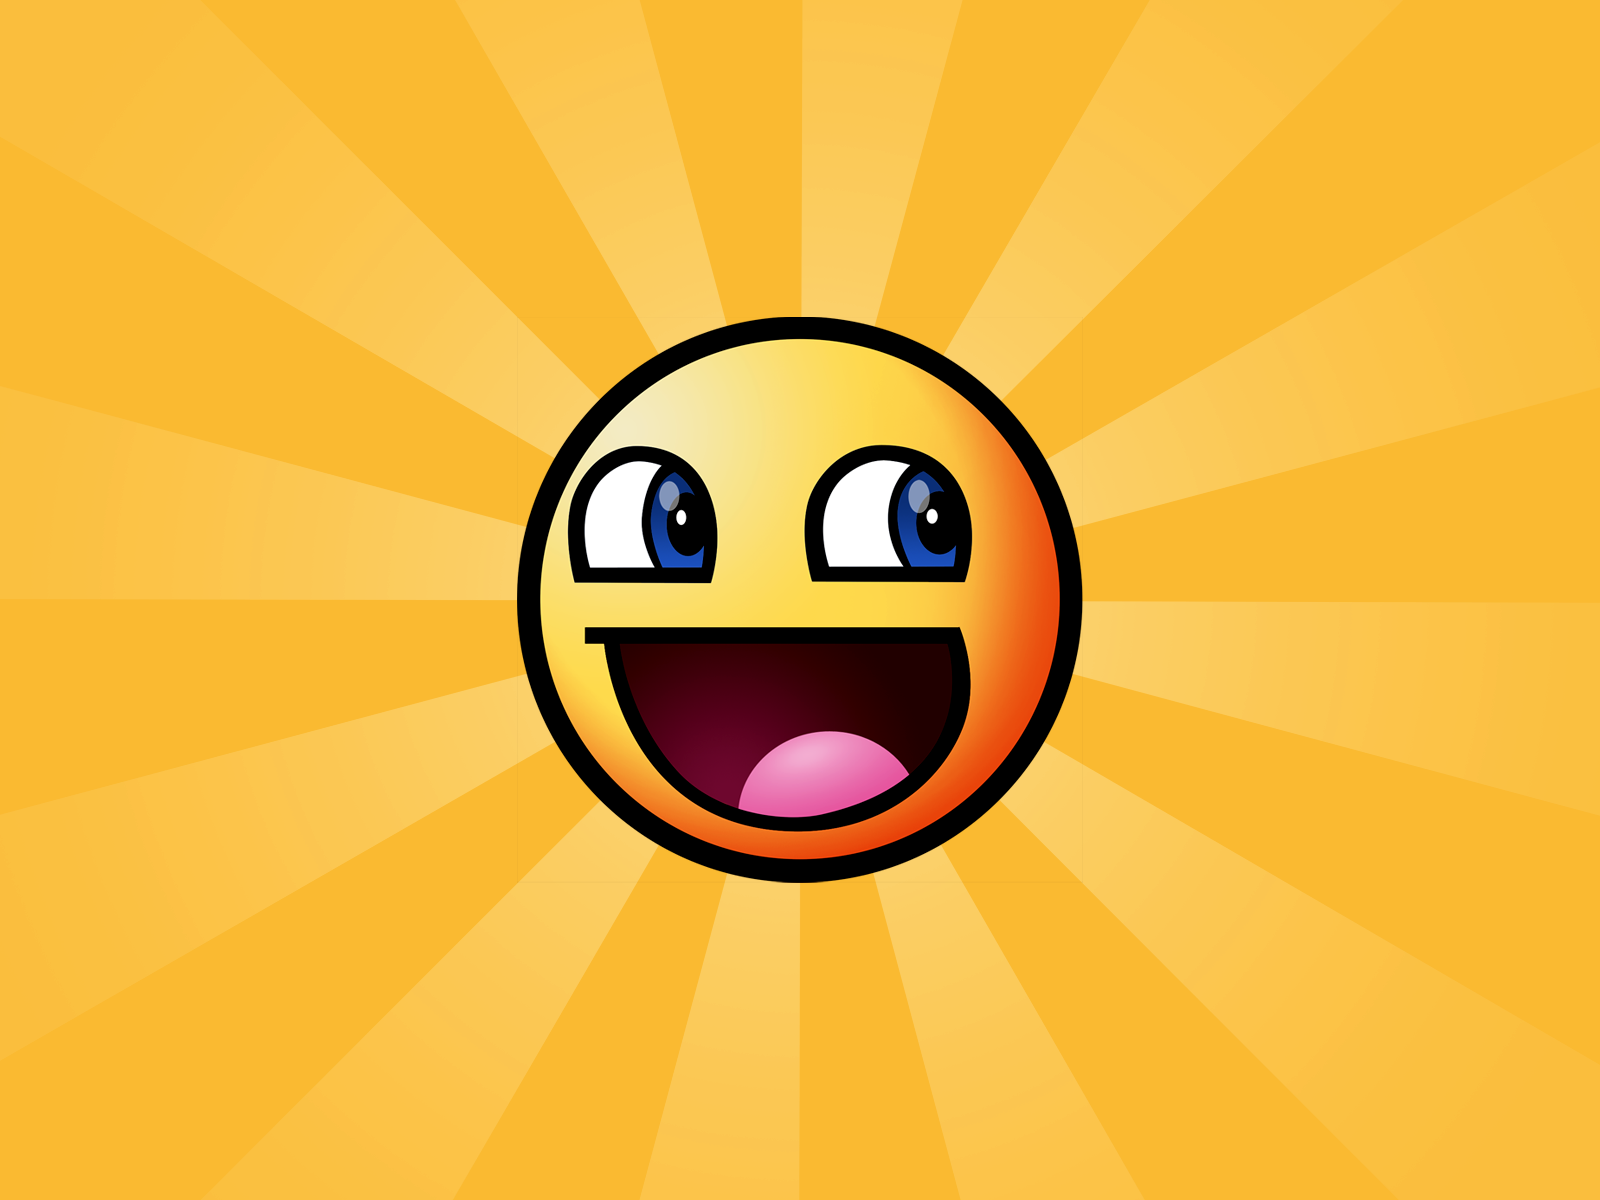 Awesome Smiley Face Wallpaper 2455 1600 x 1200